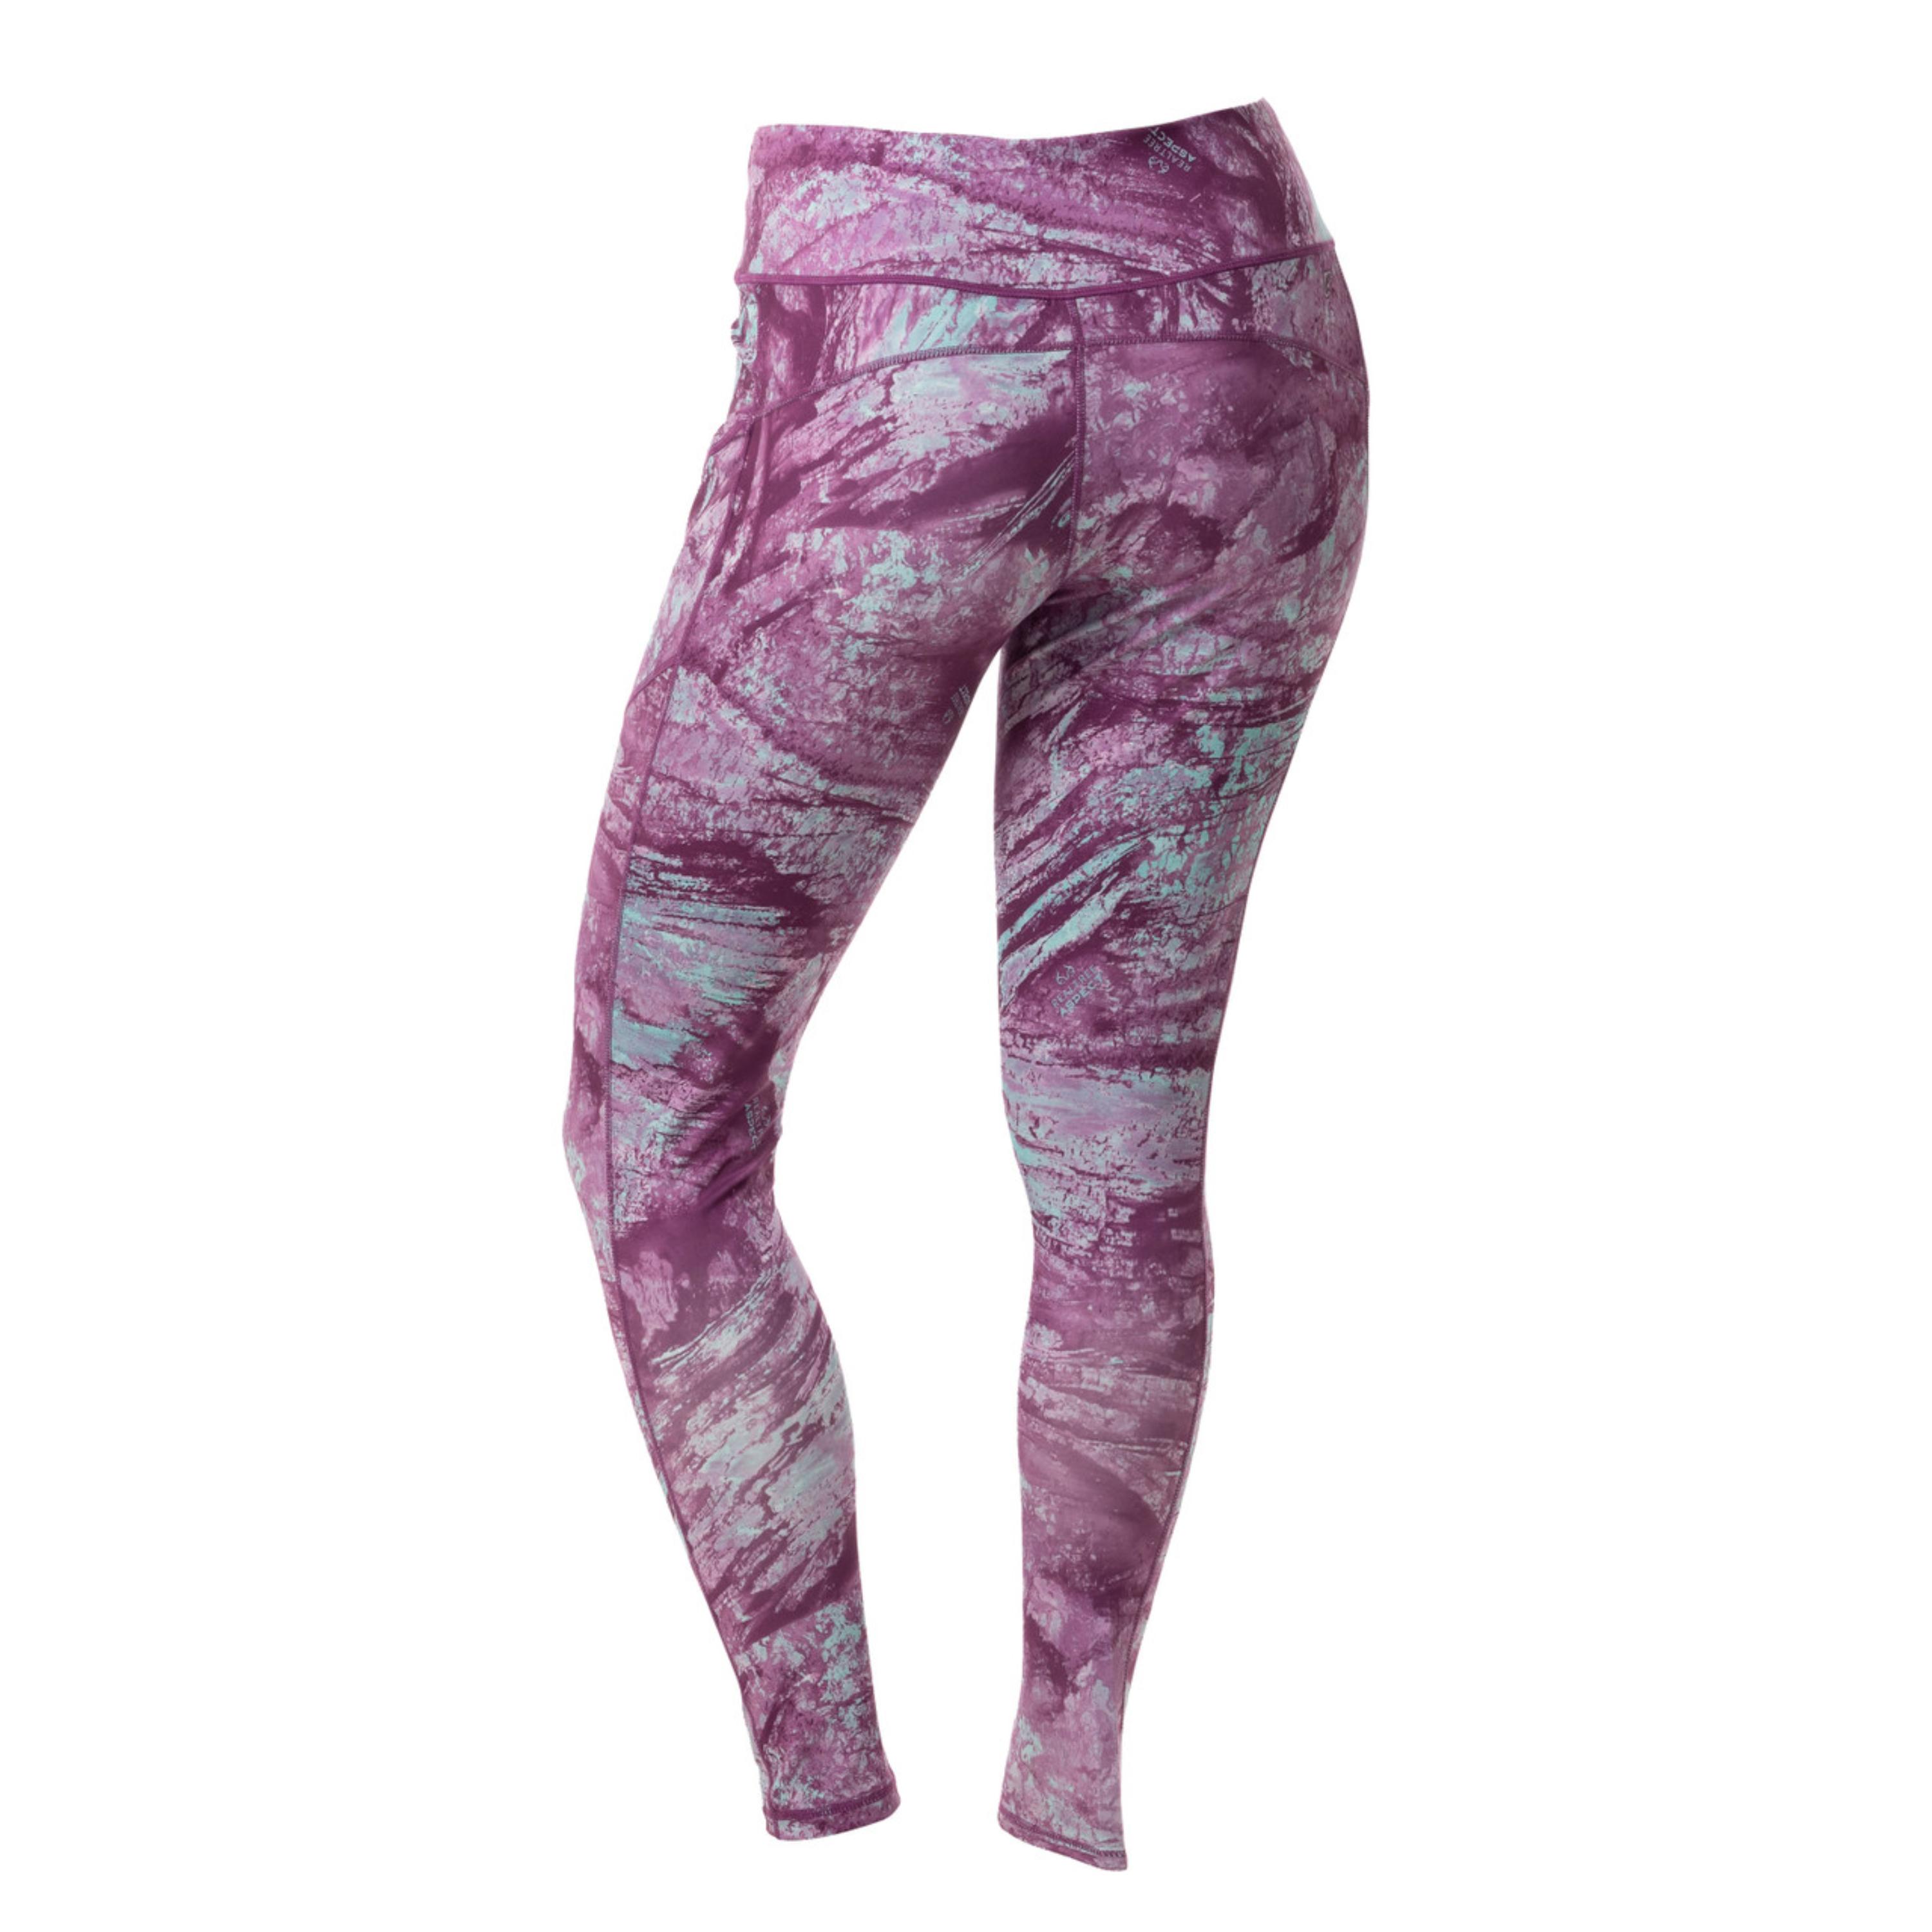 Reebok Womens Purple Camo Athletic Workout Leggings Size S Small Camouflage